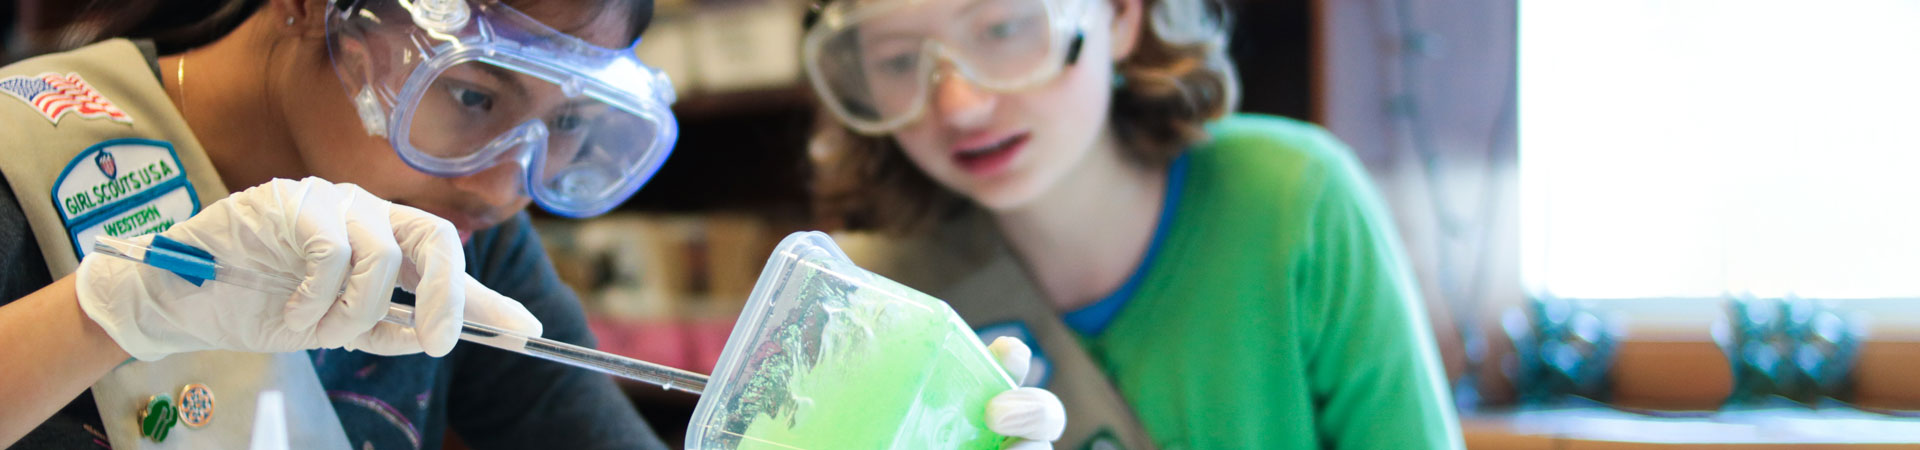  Two Girl Scouts are in a lab. They are wearing khaki-colored sashes embellished with pins and badges, safety goggles, and gloves. One Girl Scout is spooning a bright-green substance into a beaker. 